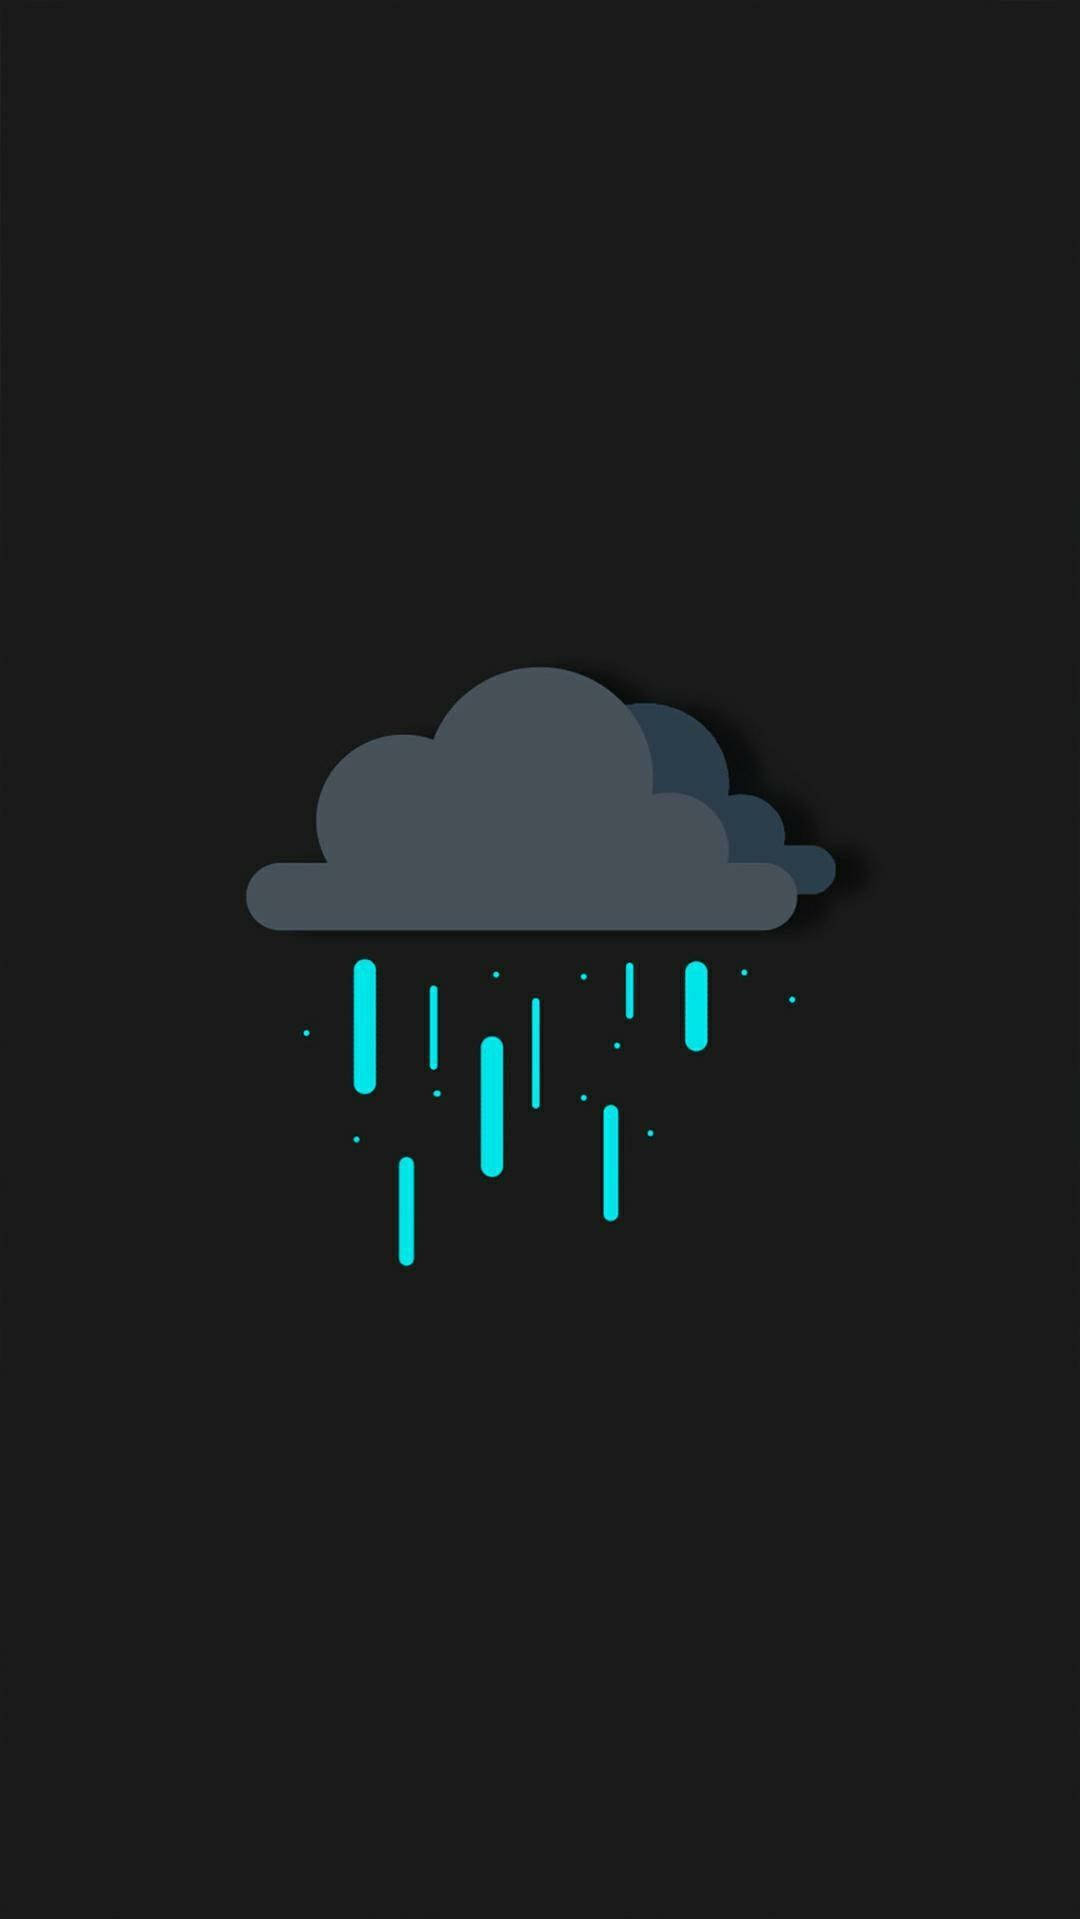 Rain Cloud For Cool Simple Background Background